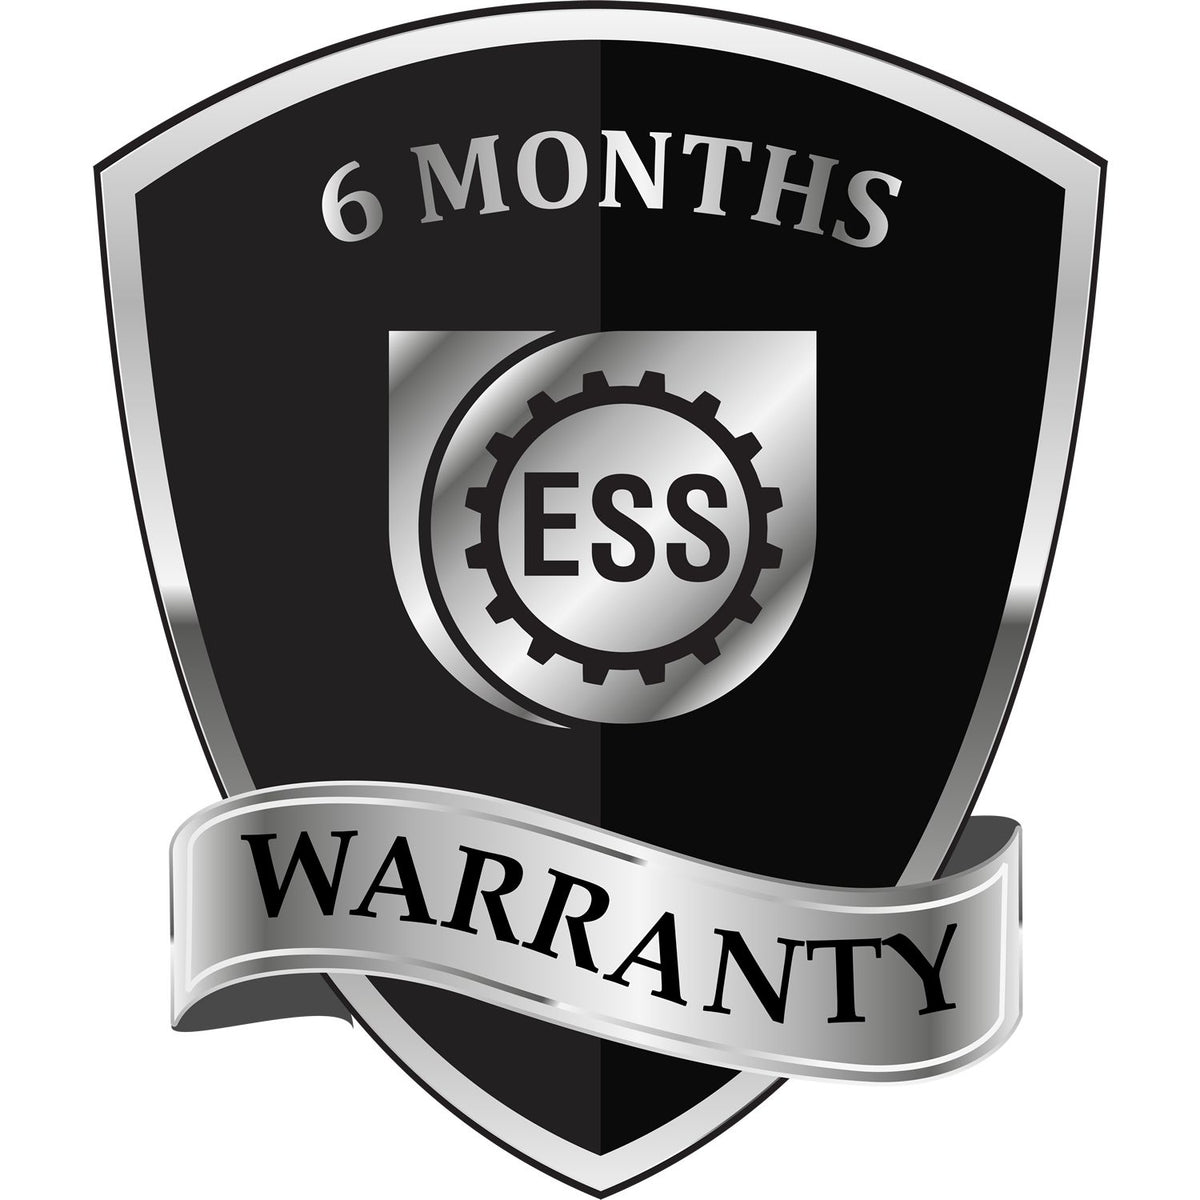 A badge or emblem showing a warranty icon for the PSI Vermont Notary Stamp